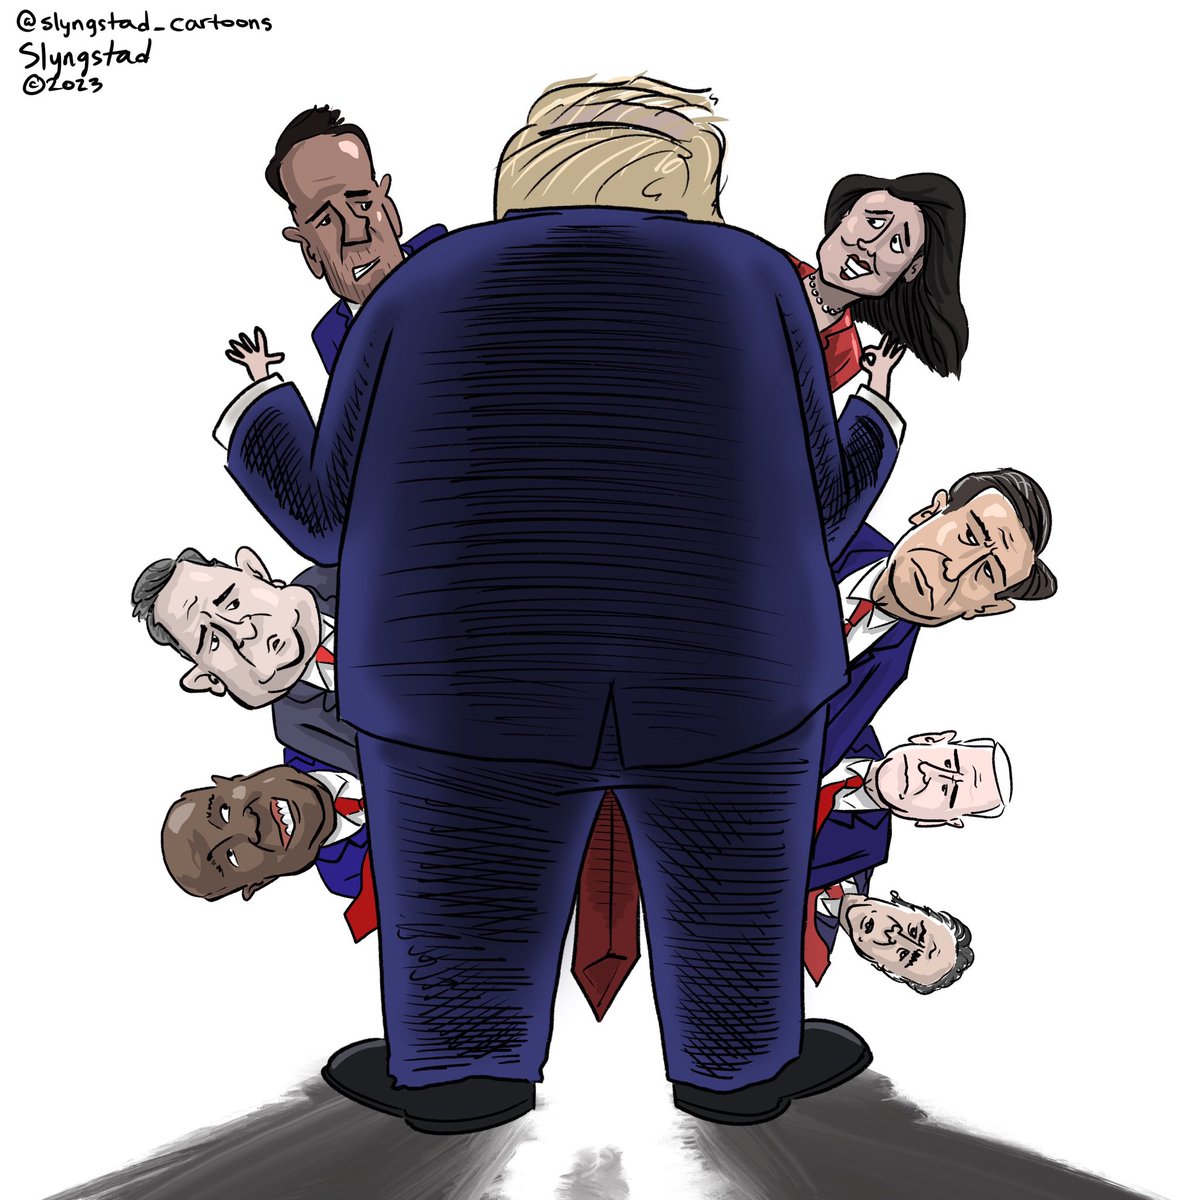 Seven candidates tried their best to stand out from Trump. #GOPDebate #RepublicanDebate #PartyOfTrump